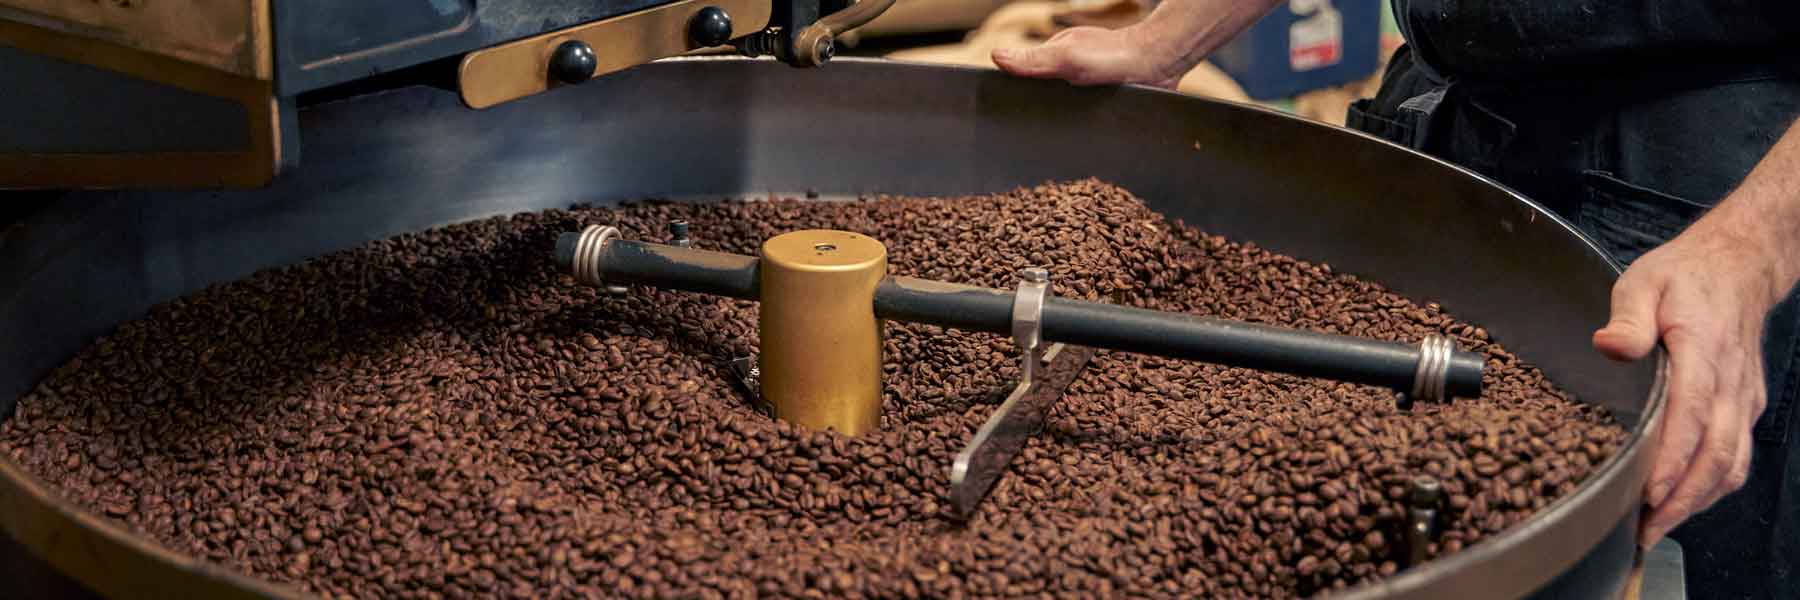 Hand Roasted Coffee Beans from Seven Coffee